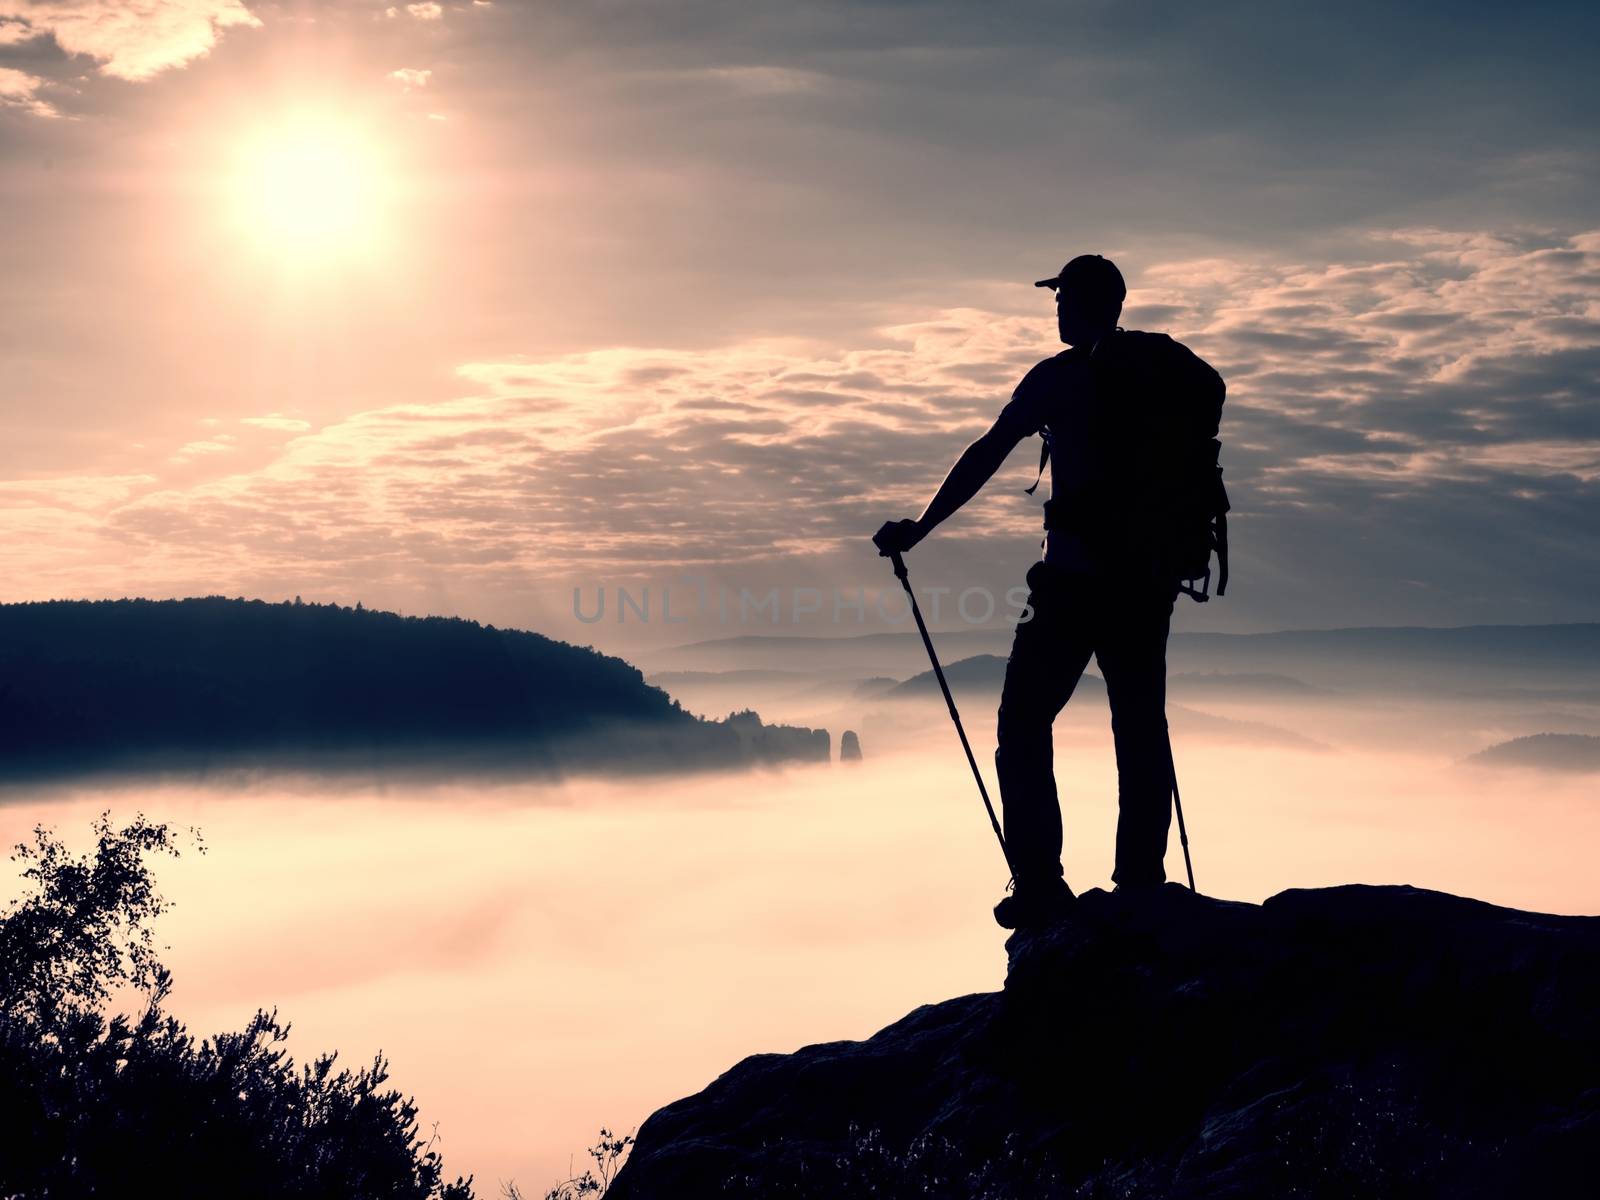 Tall tourist with poles in hand. View point above heavy misty valley.  by rdonar2